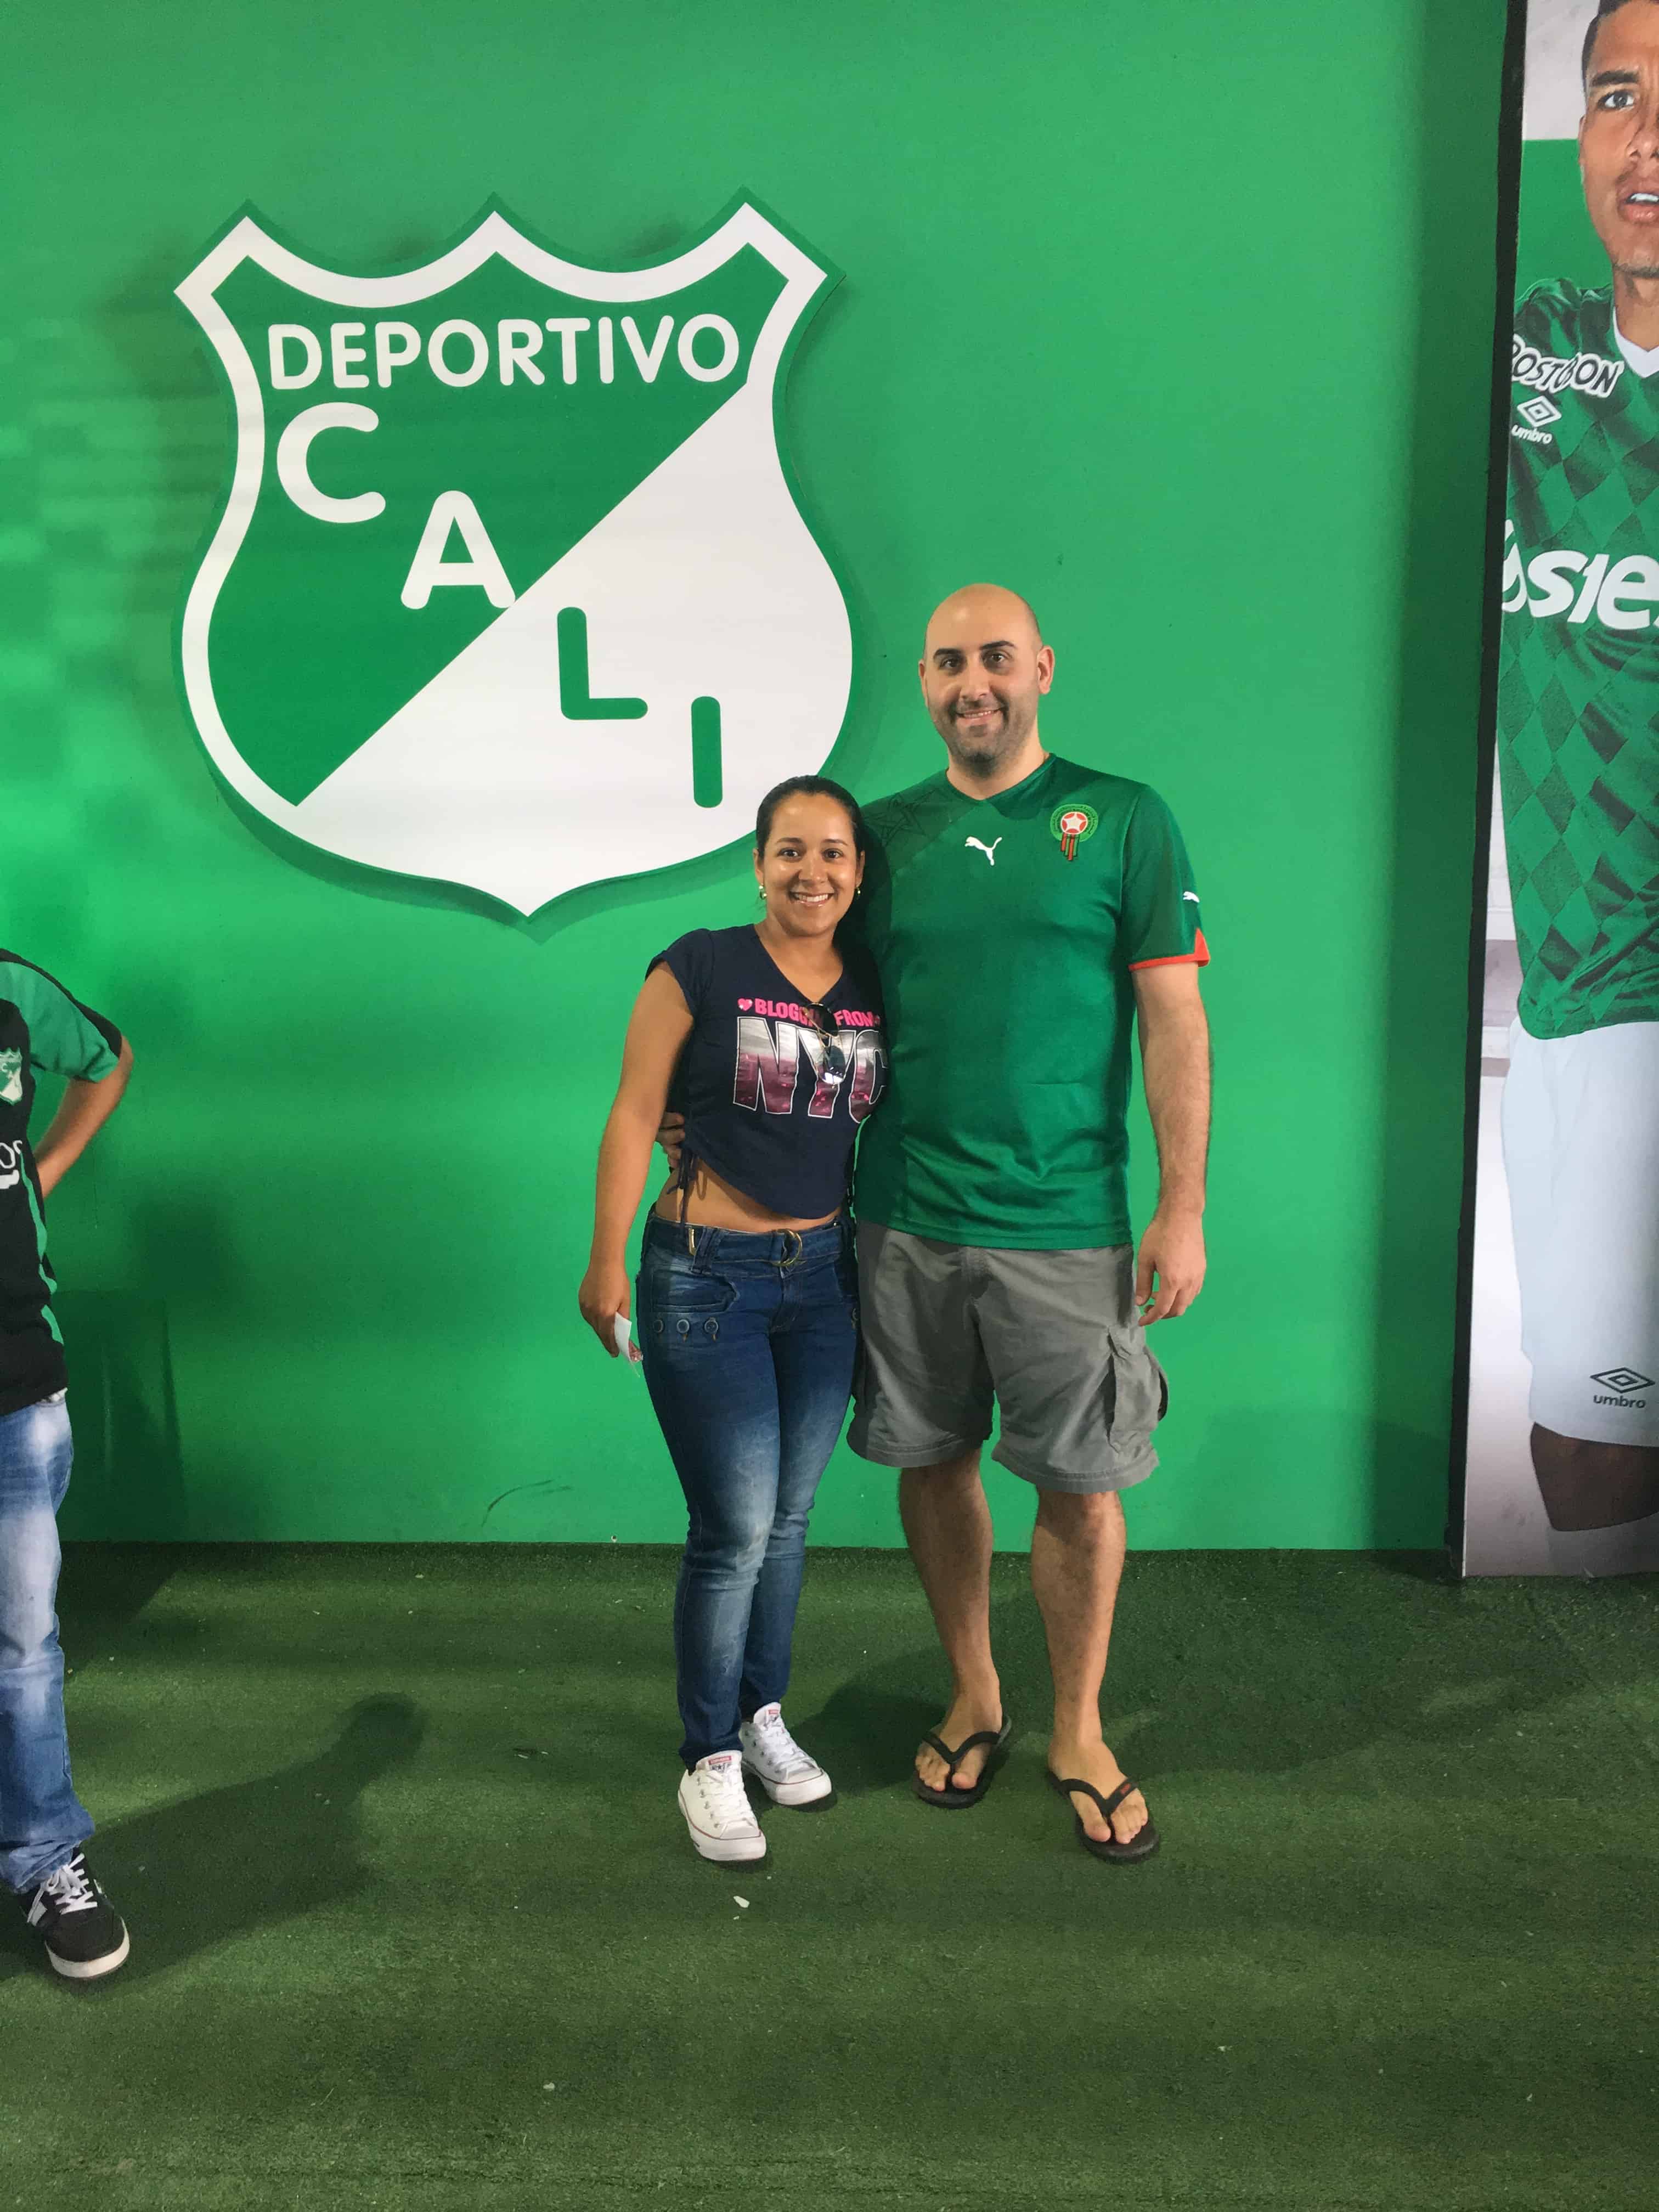 Marisol and I in front of the Deportivo Cali logo at Estadio Deportivo Cali in Palmira, Valle del Cauca, Colombia